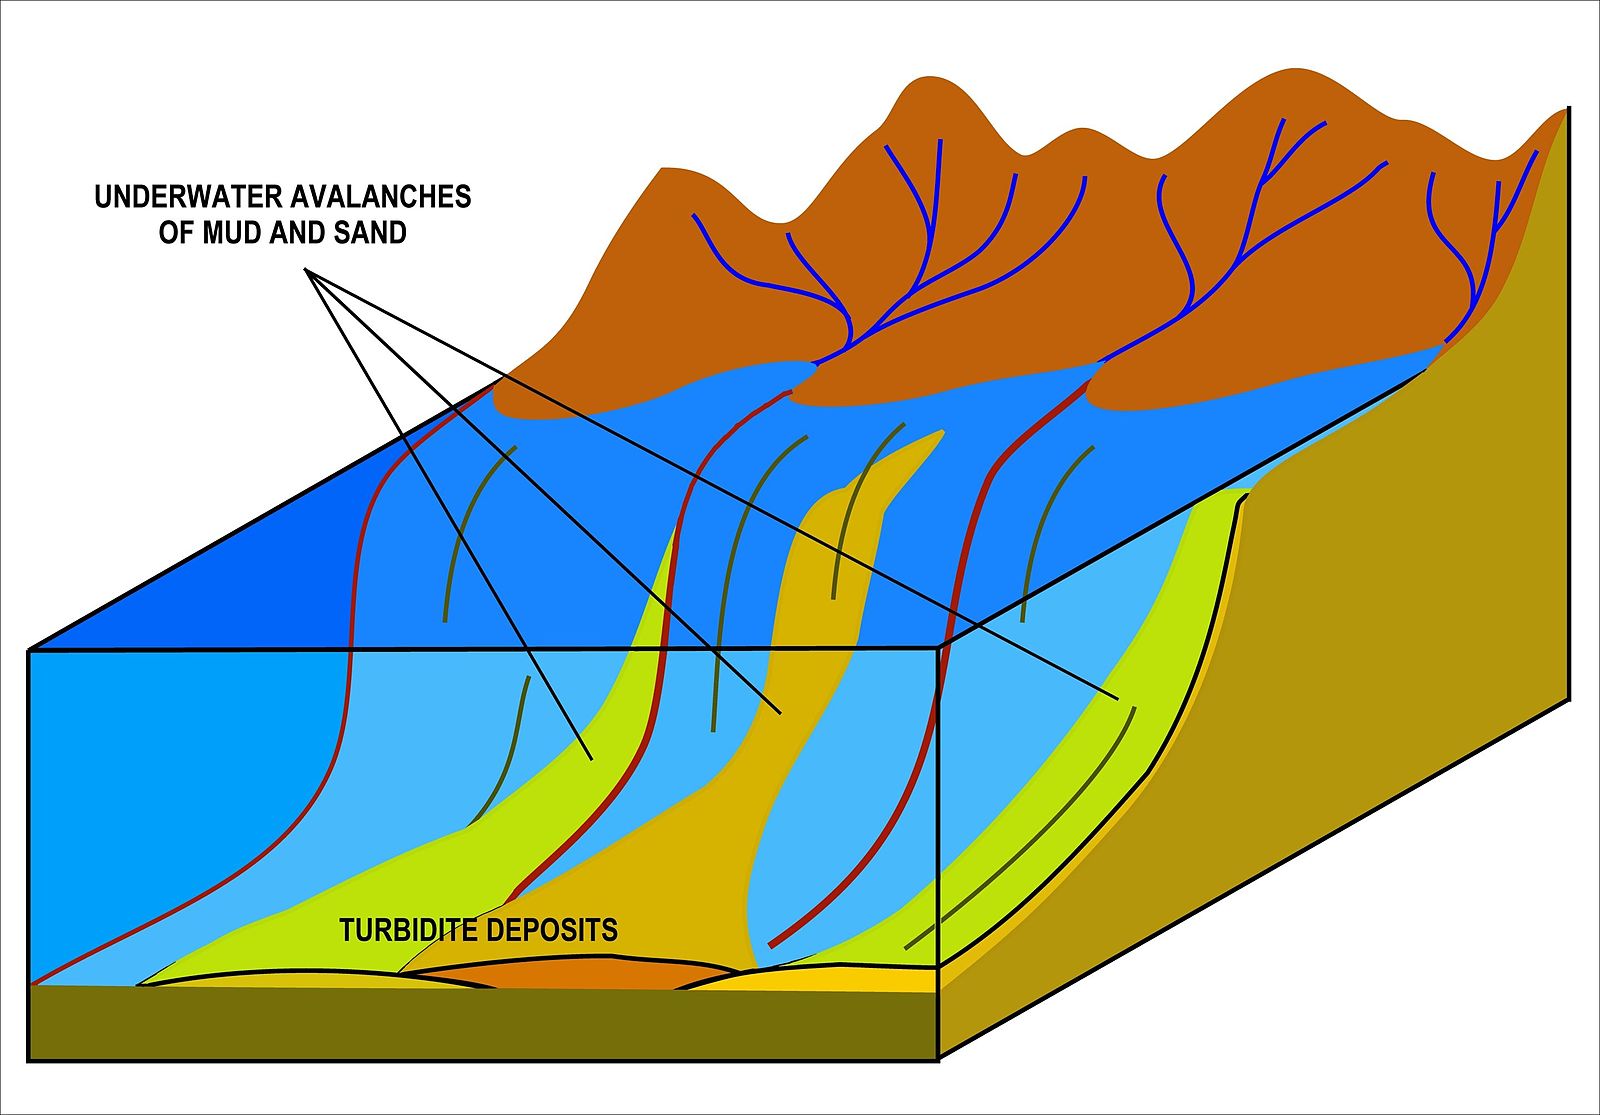 Block diagram showing continental shelf sloping down toward deep ocean water with underwater avalanches of mud and sand labeled on the slope and lumps at the base labeled Turbidite Deposits.